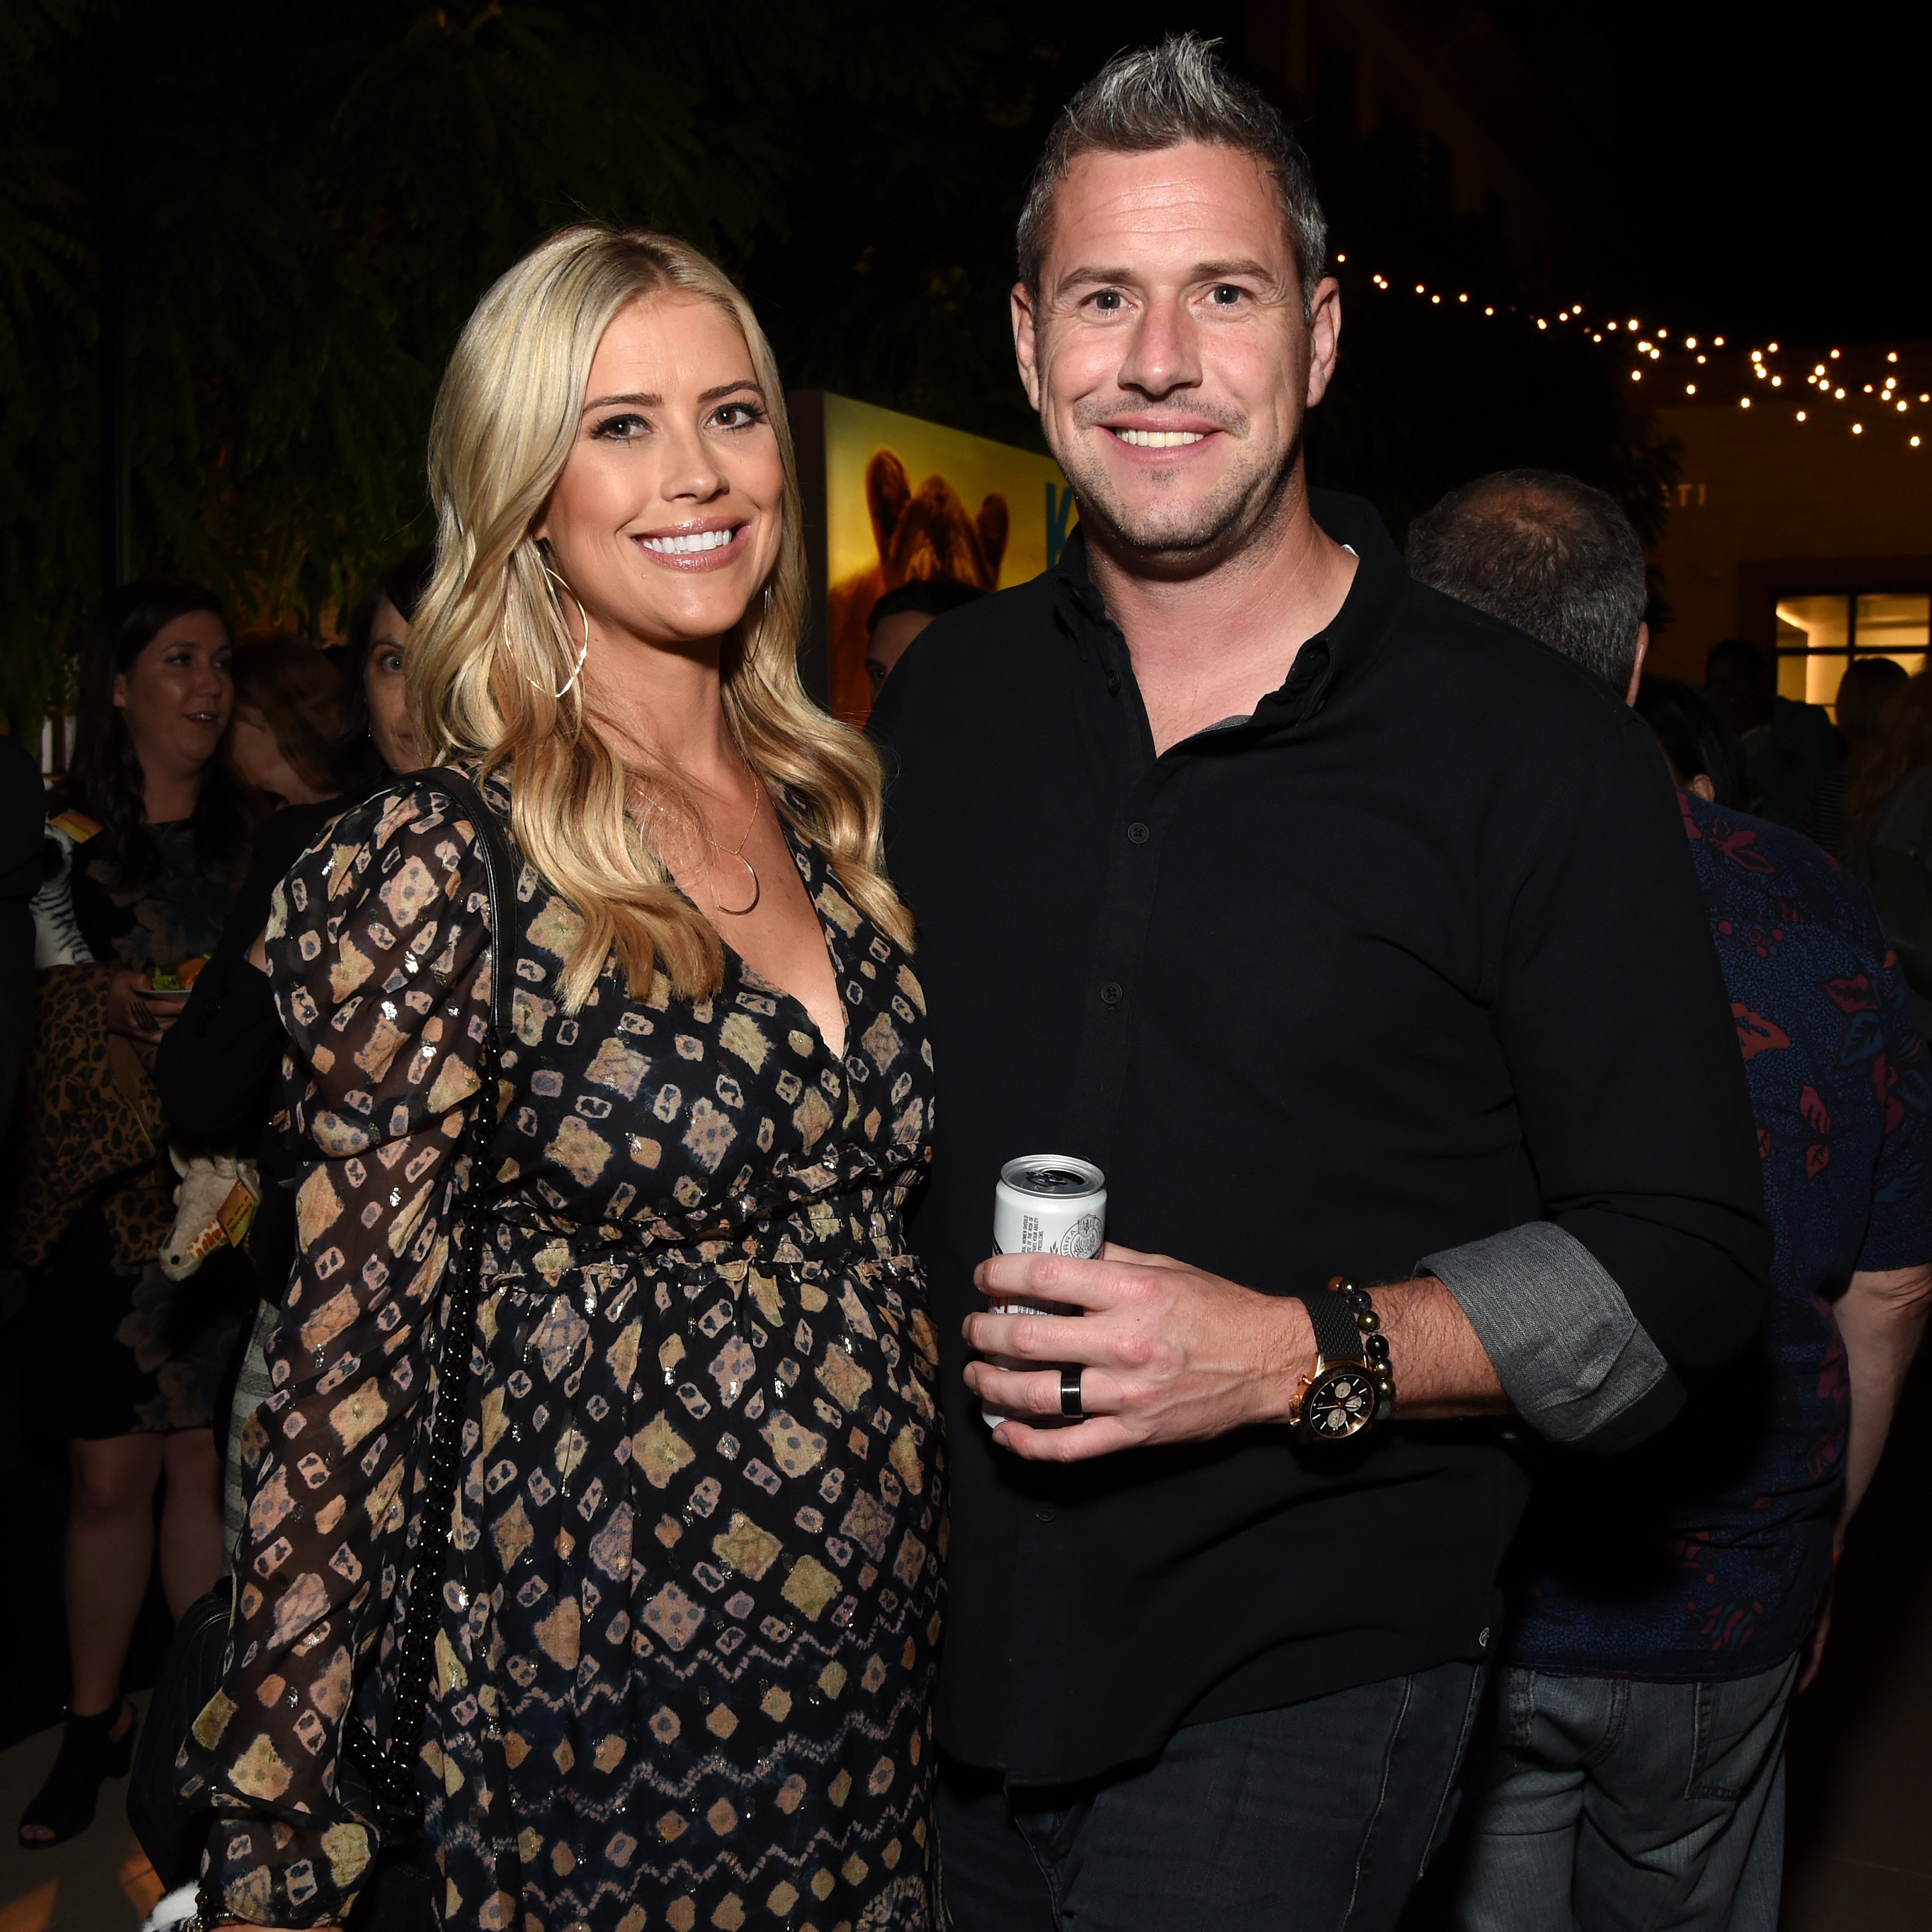 Christina and Ant Anstead at the "Serengeti" premiere on July 23, 2019 in Beverly Hills, California | Photo: Getty Images